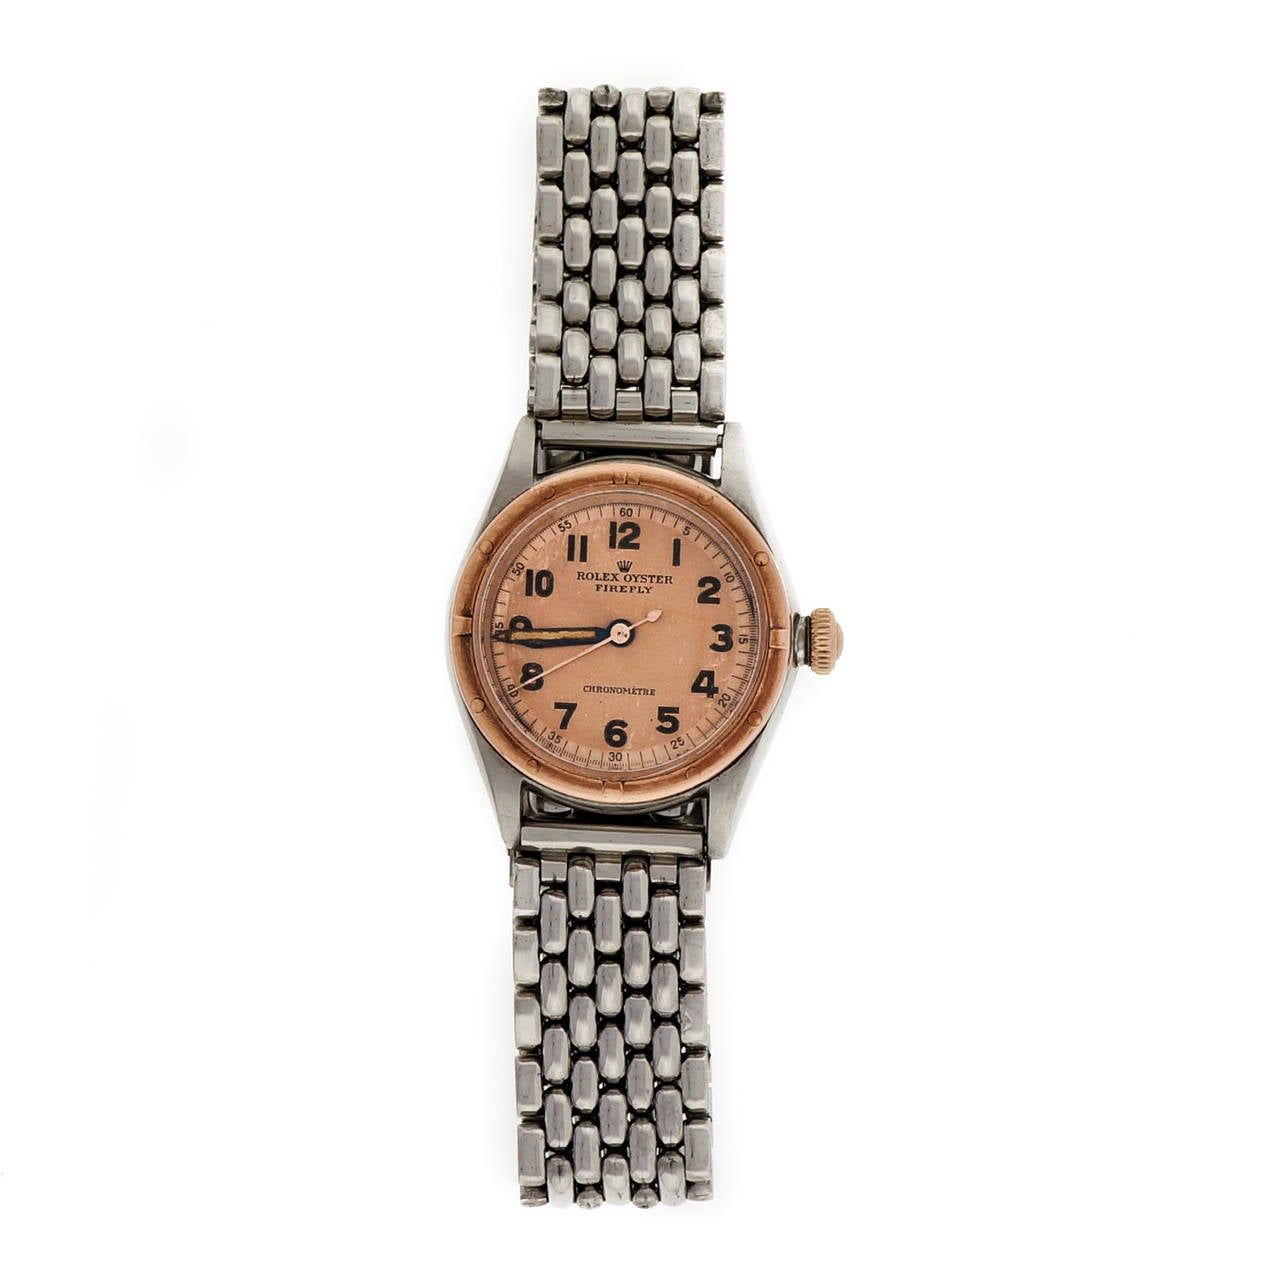 Stainless steel and 18k rose gold Rolex Firefly bubbleback, Ref. 3121, circa 1942,  28.5mm case with 18k rose gold bezel and crown. Rose dial. Steel grain-of-rice Rolex bracelet. Manual-wind movement.

Stainless steel and 18k rose gold
Length: